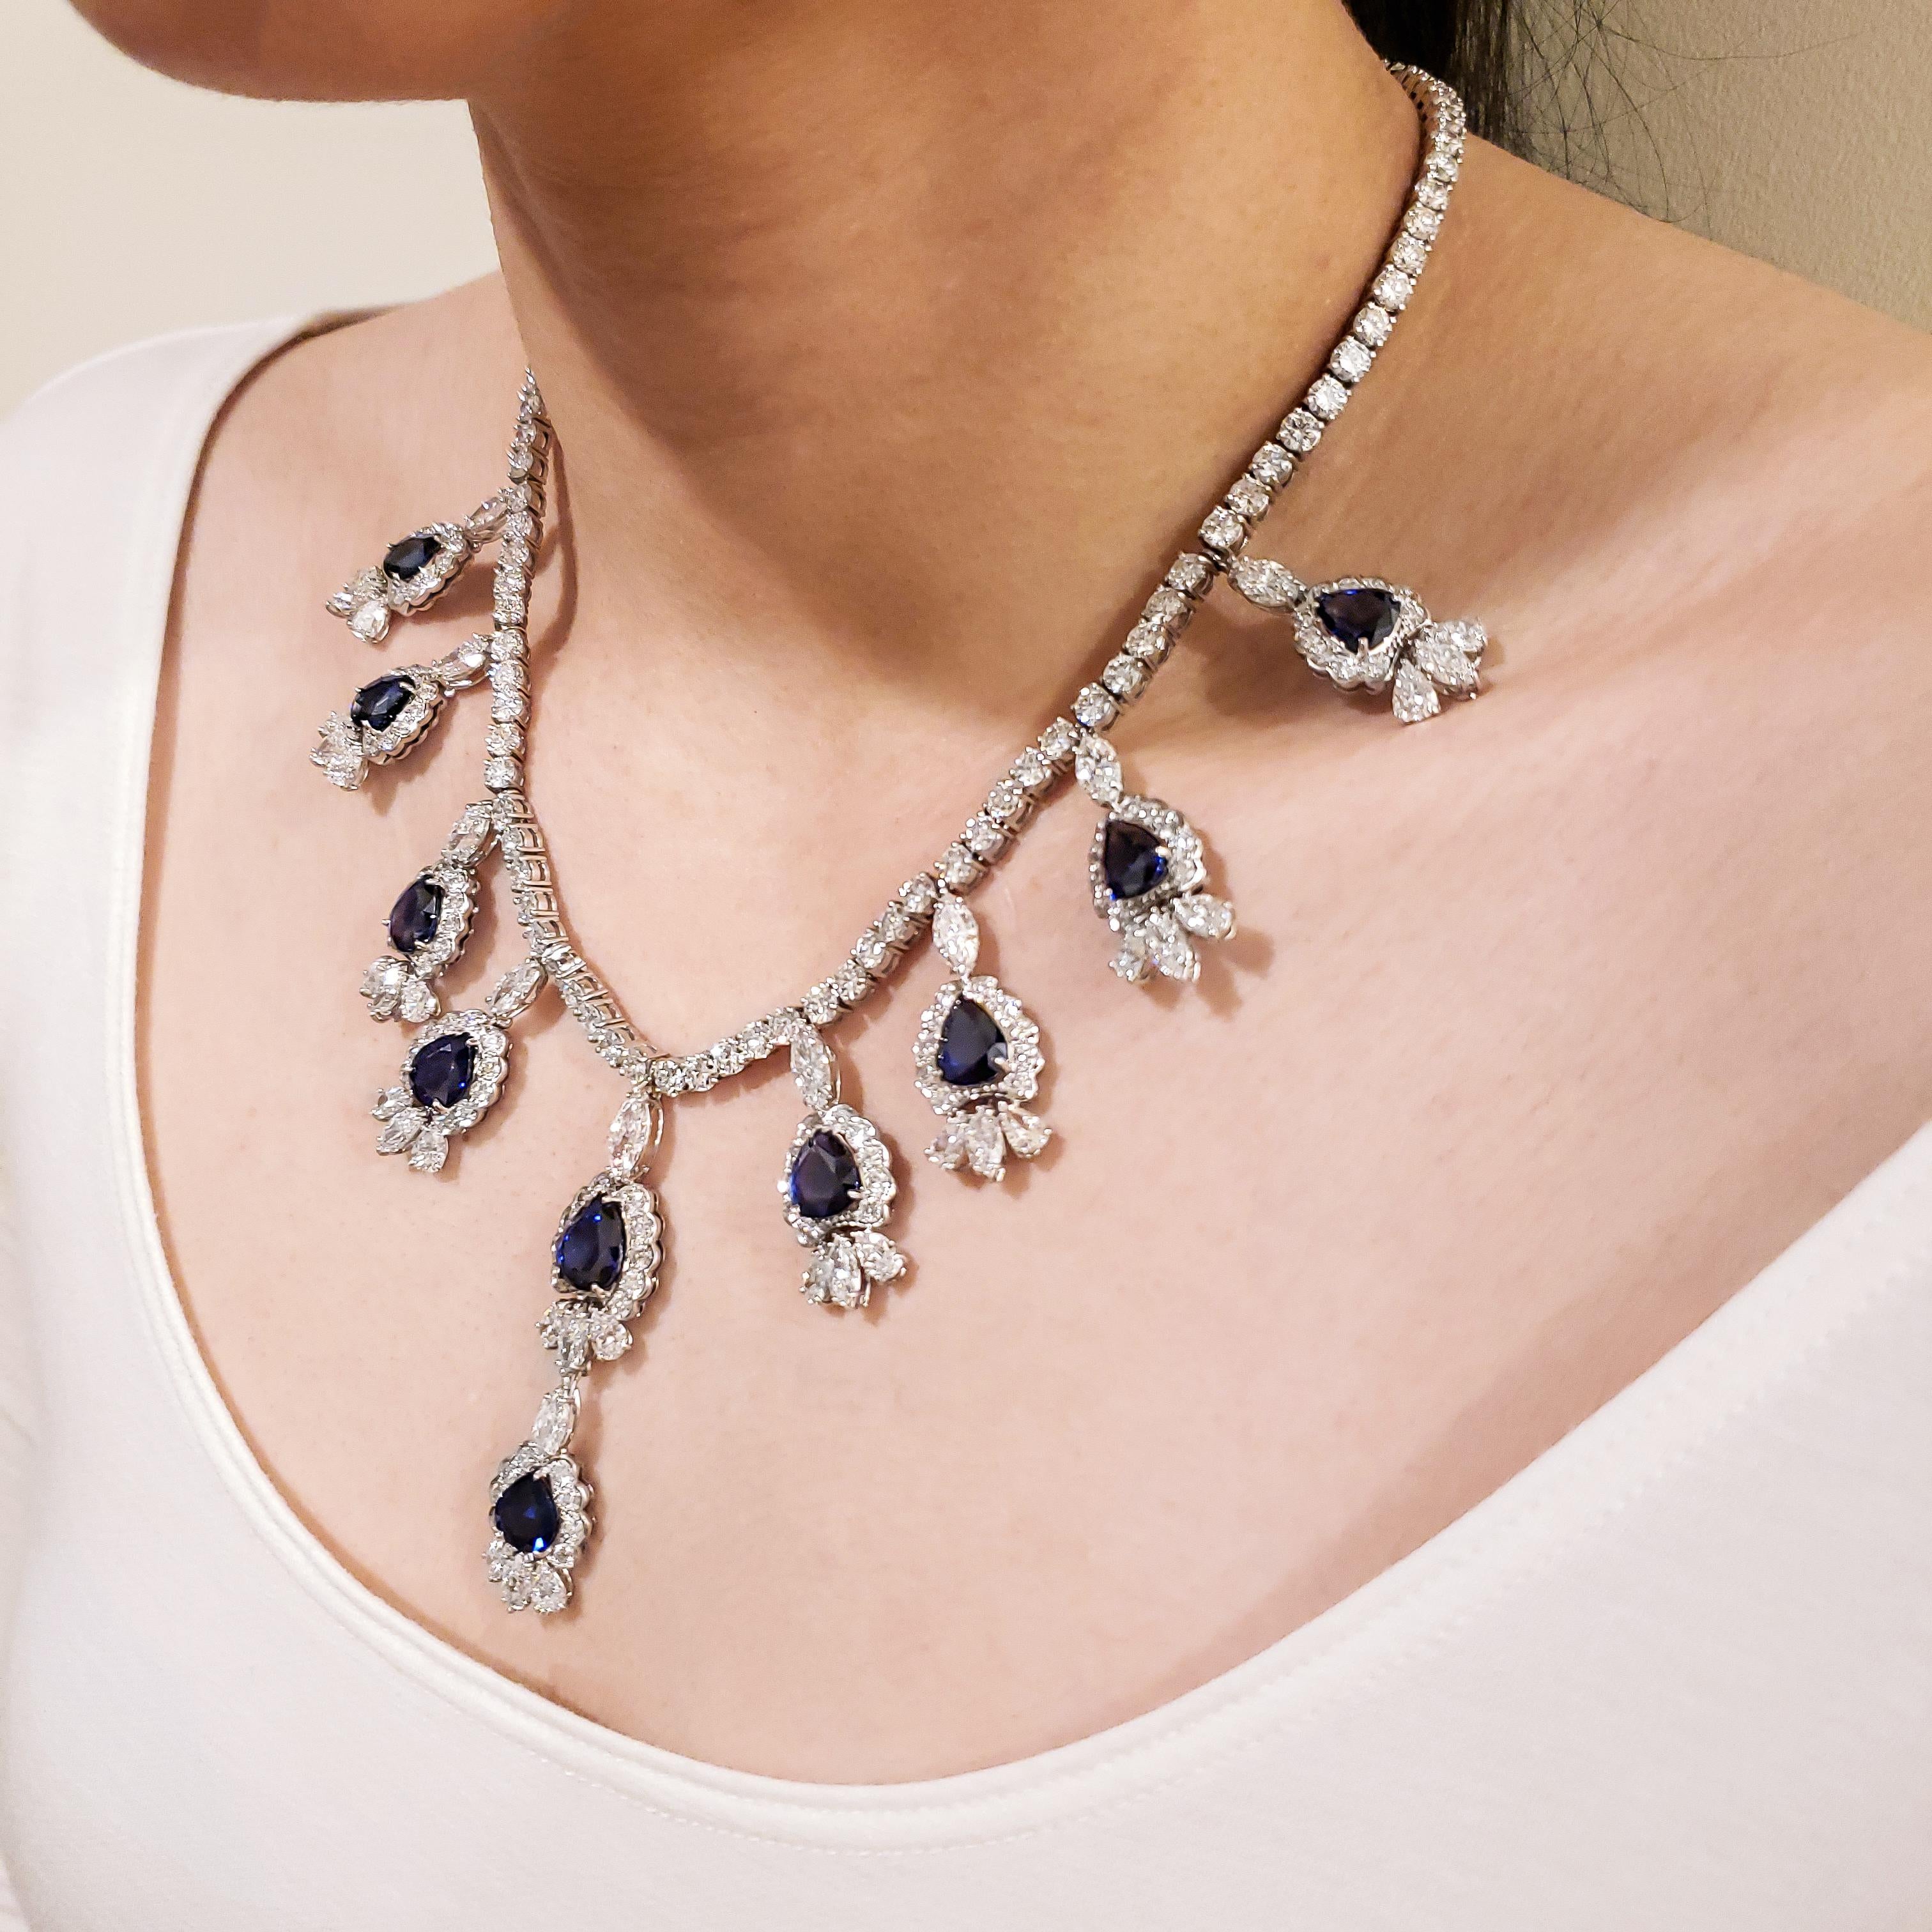 66.75 Carat Blue Sapphire and Diamond Earrings and Necklace Set For Sale 1